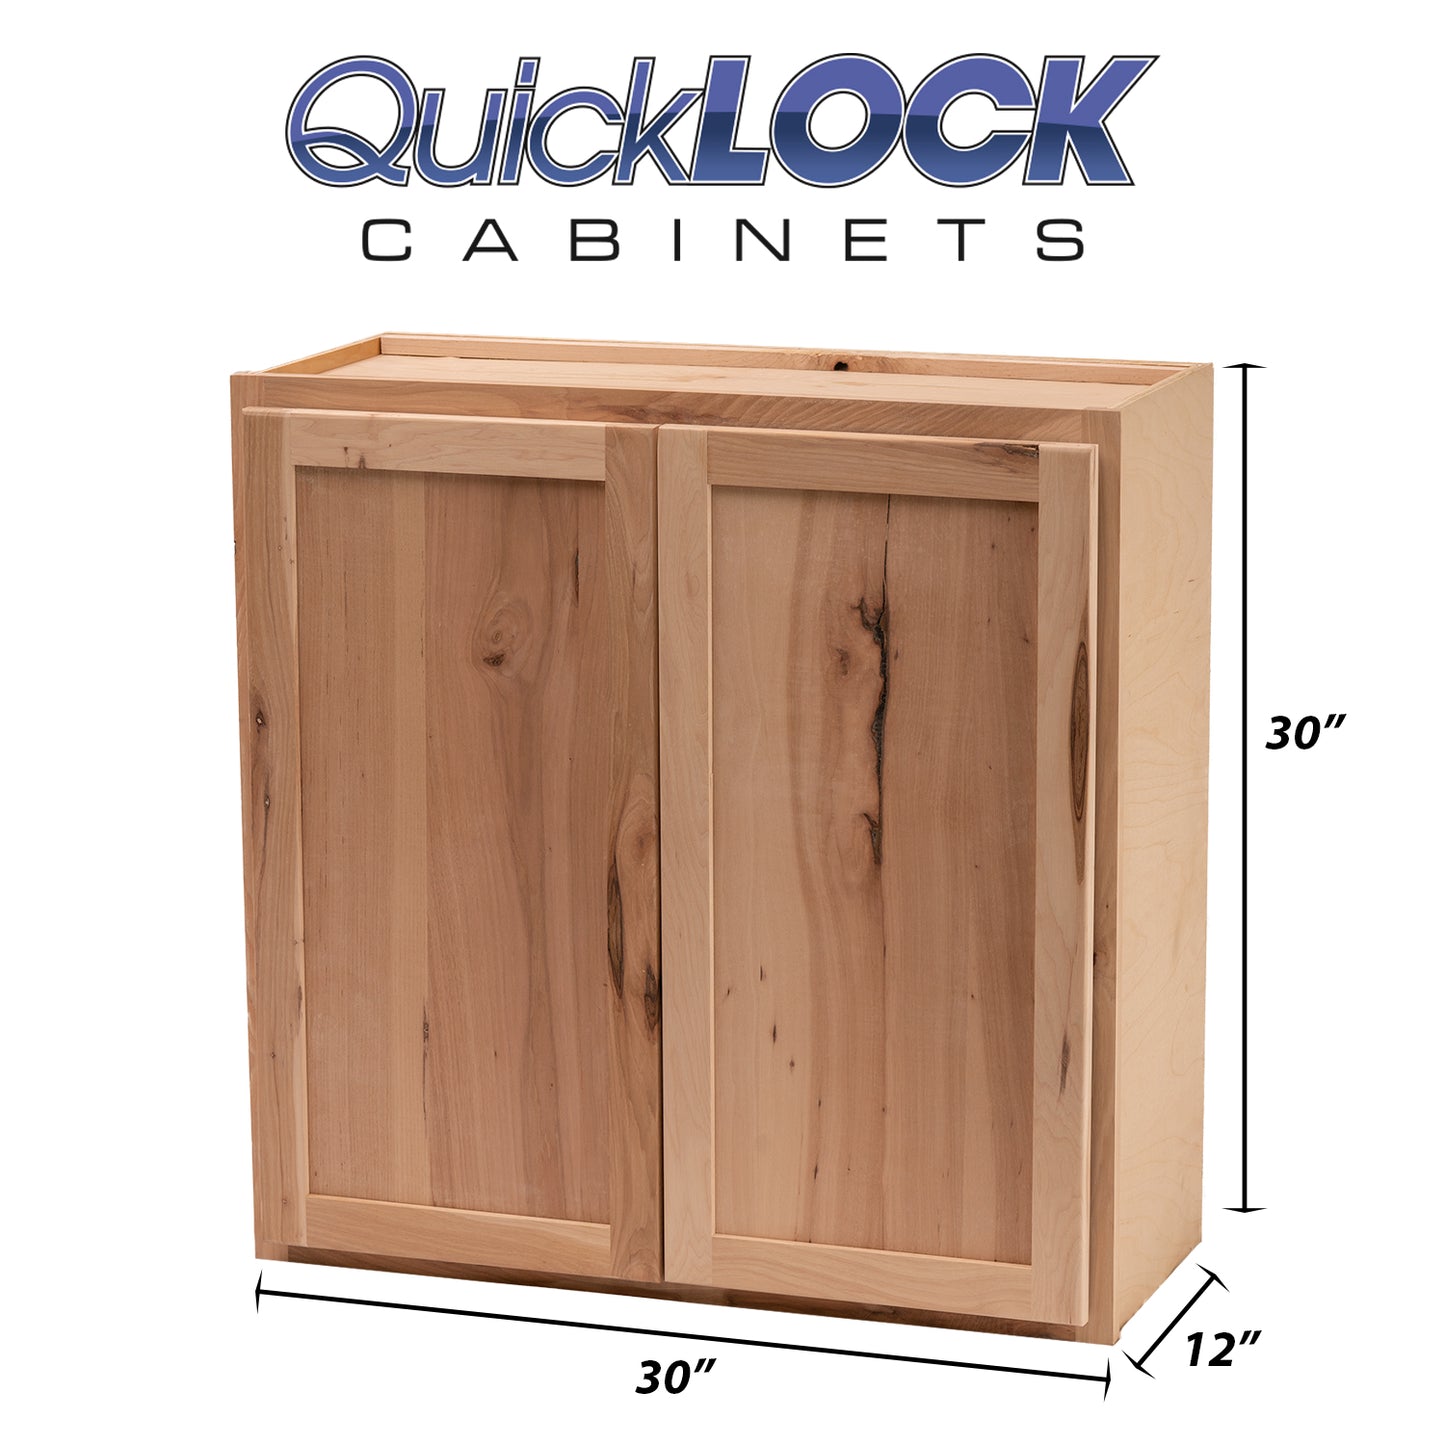 Quicklock RTA - Winding River Collection - Raw Hickory 30"Wx30"Hx12"D Wall Cabinet